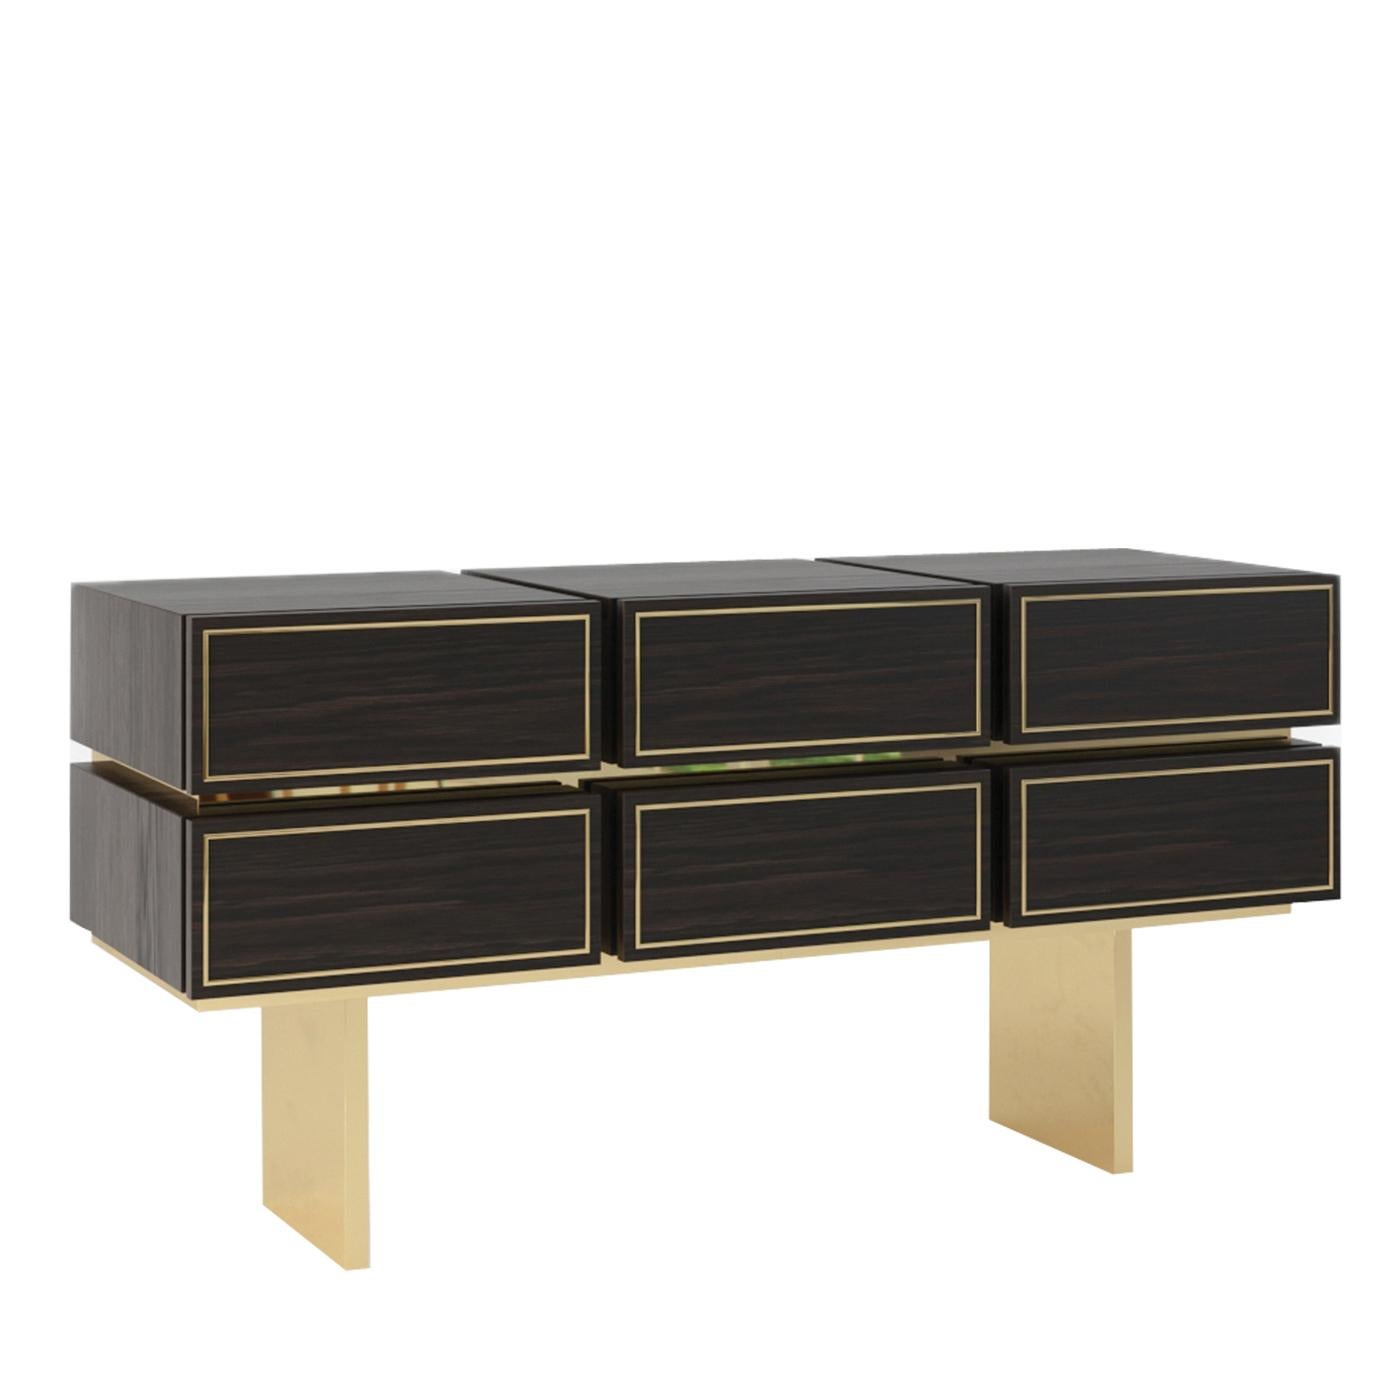 This stunning wooden dresser is composed of six spacious drawers embellished with brass-finished metal details that match the same finish of the dainty metal sheets supporting the whole structure. Perfect to be displayed in the most refined